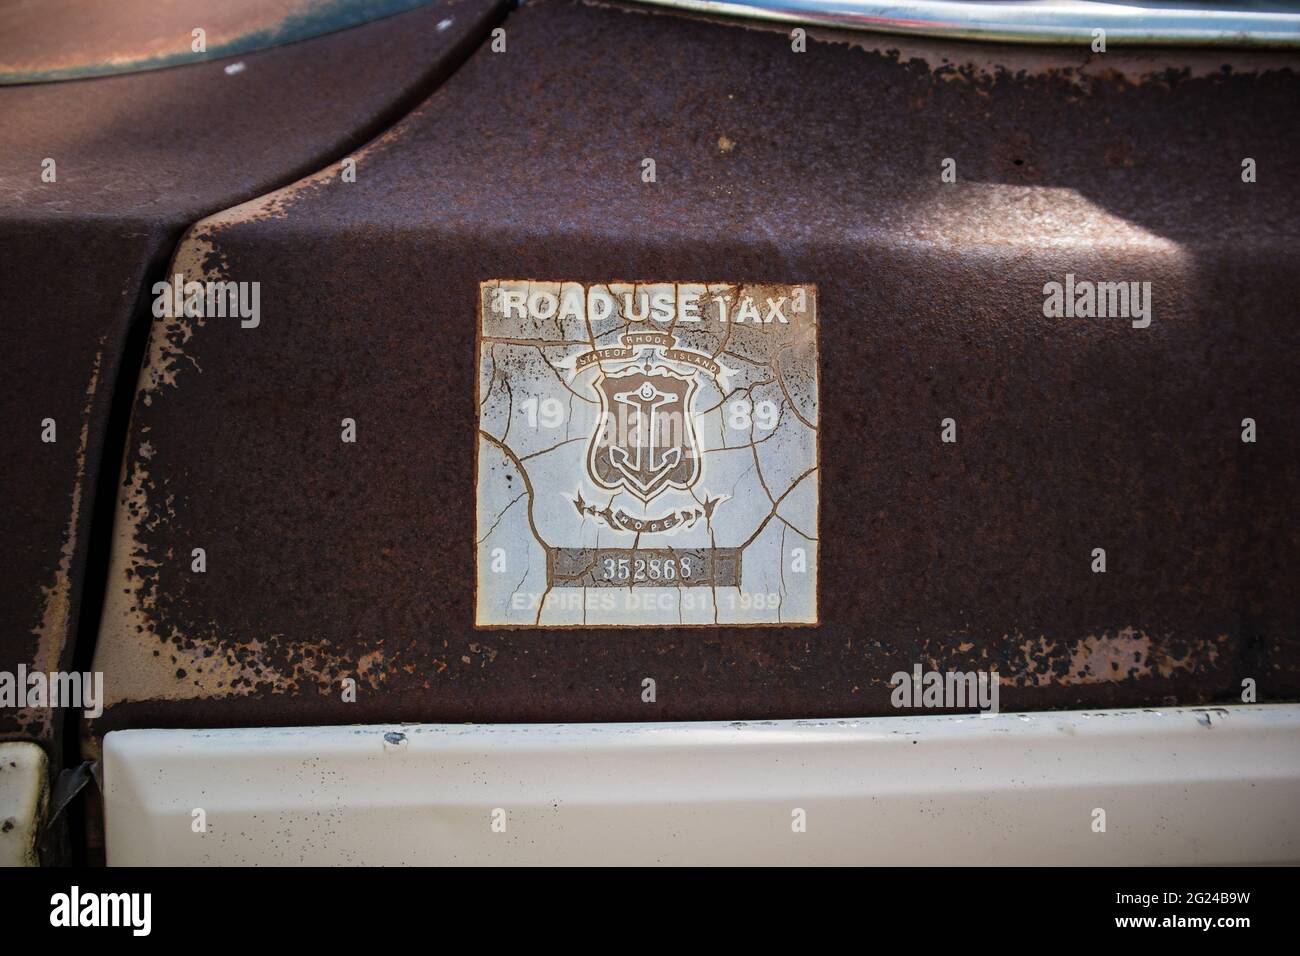 Rhode Island State: A Road Use Tax sticker that expired in December 1989 on the rust door of a wreck car Stock Photo